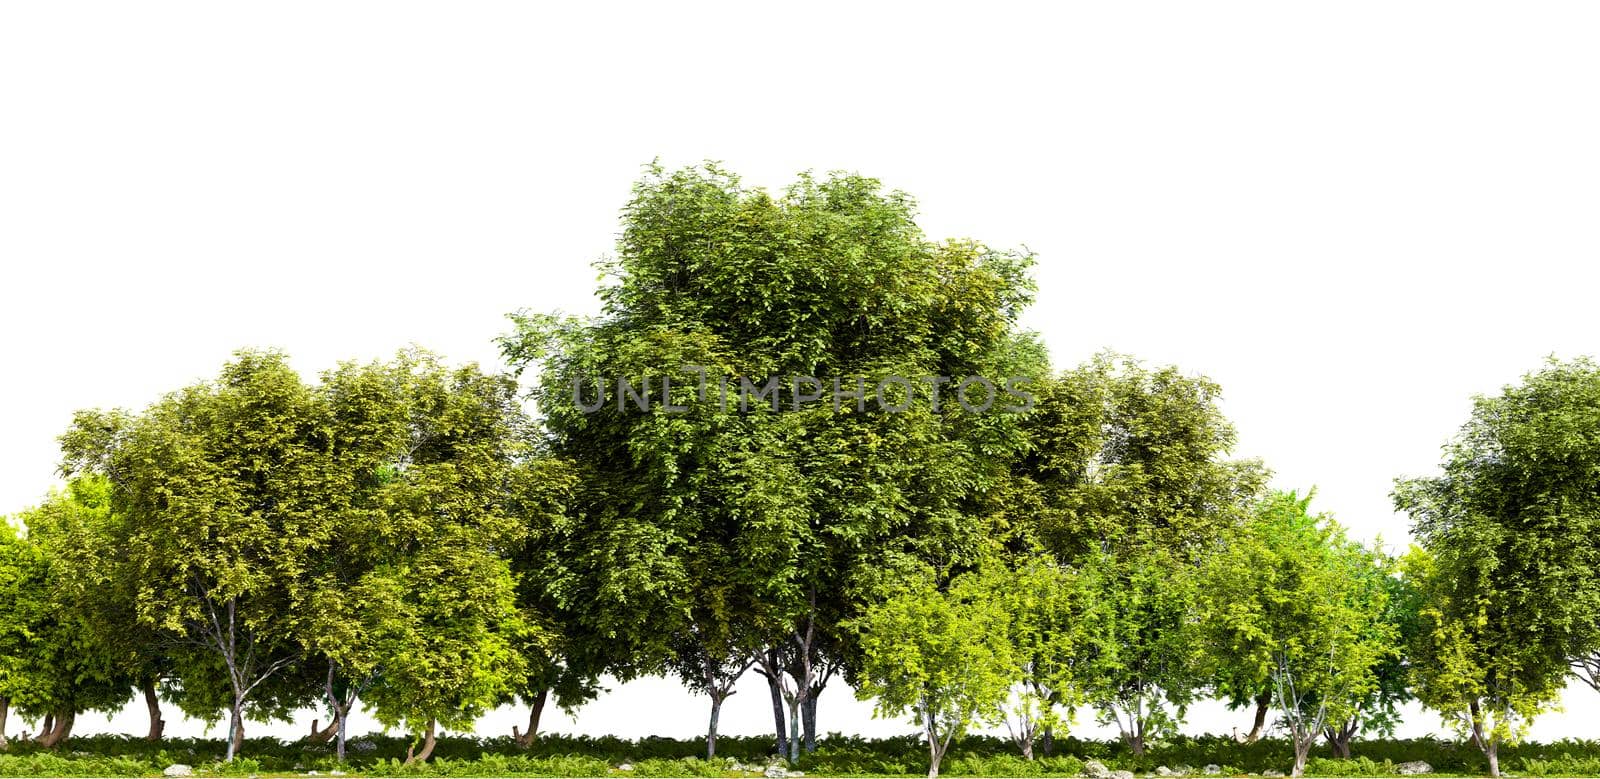 Row of trees isolated on white background. 3D rendering illustration.